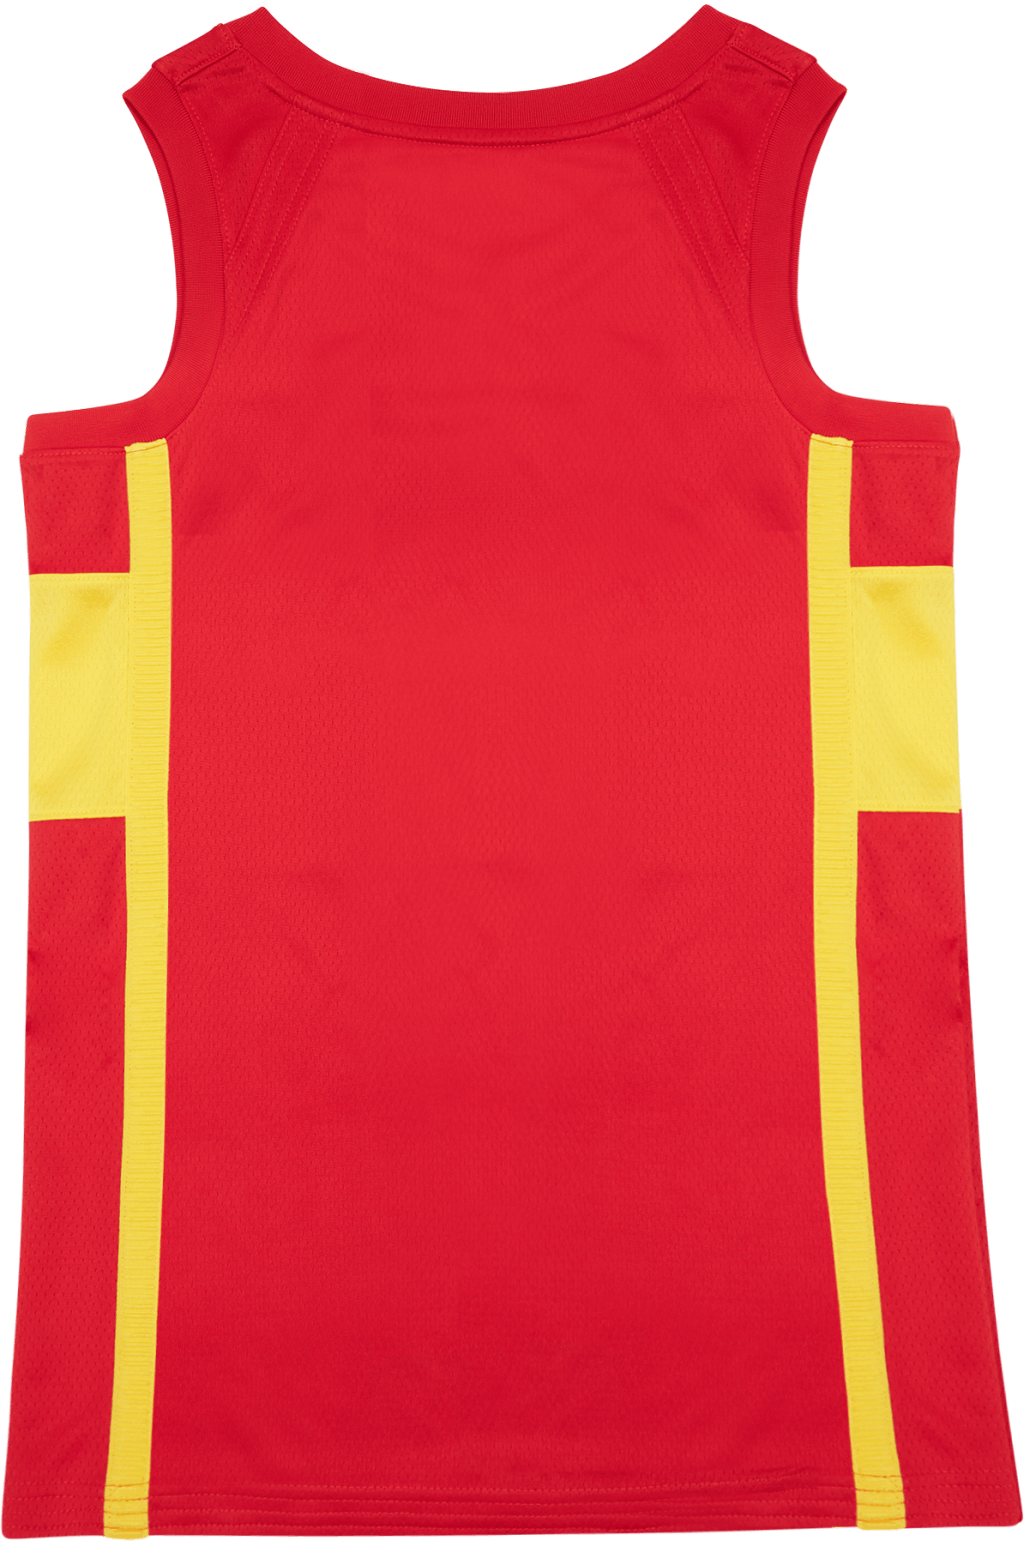 Spain Limited Road Jersey